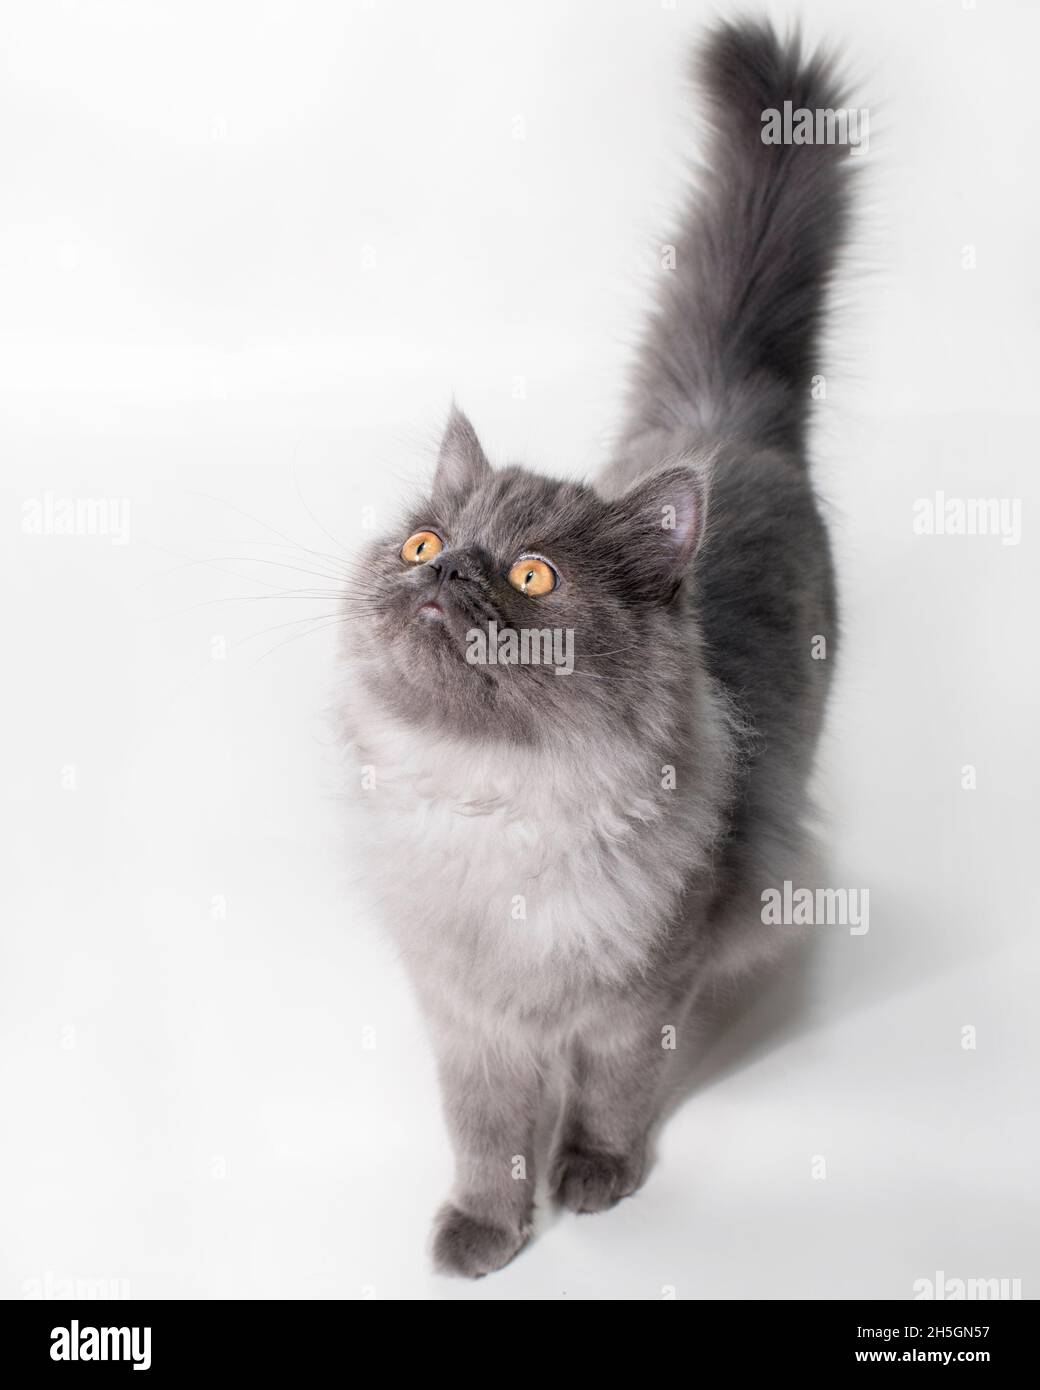 Cute long haired grey cat walking towards the camera looking up. Stock Photo